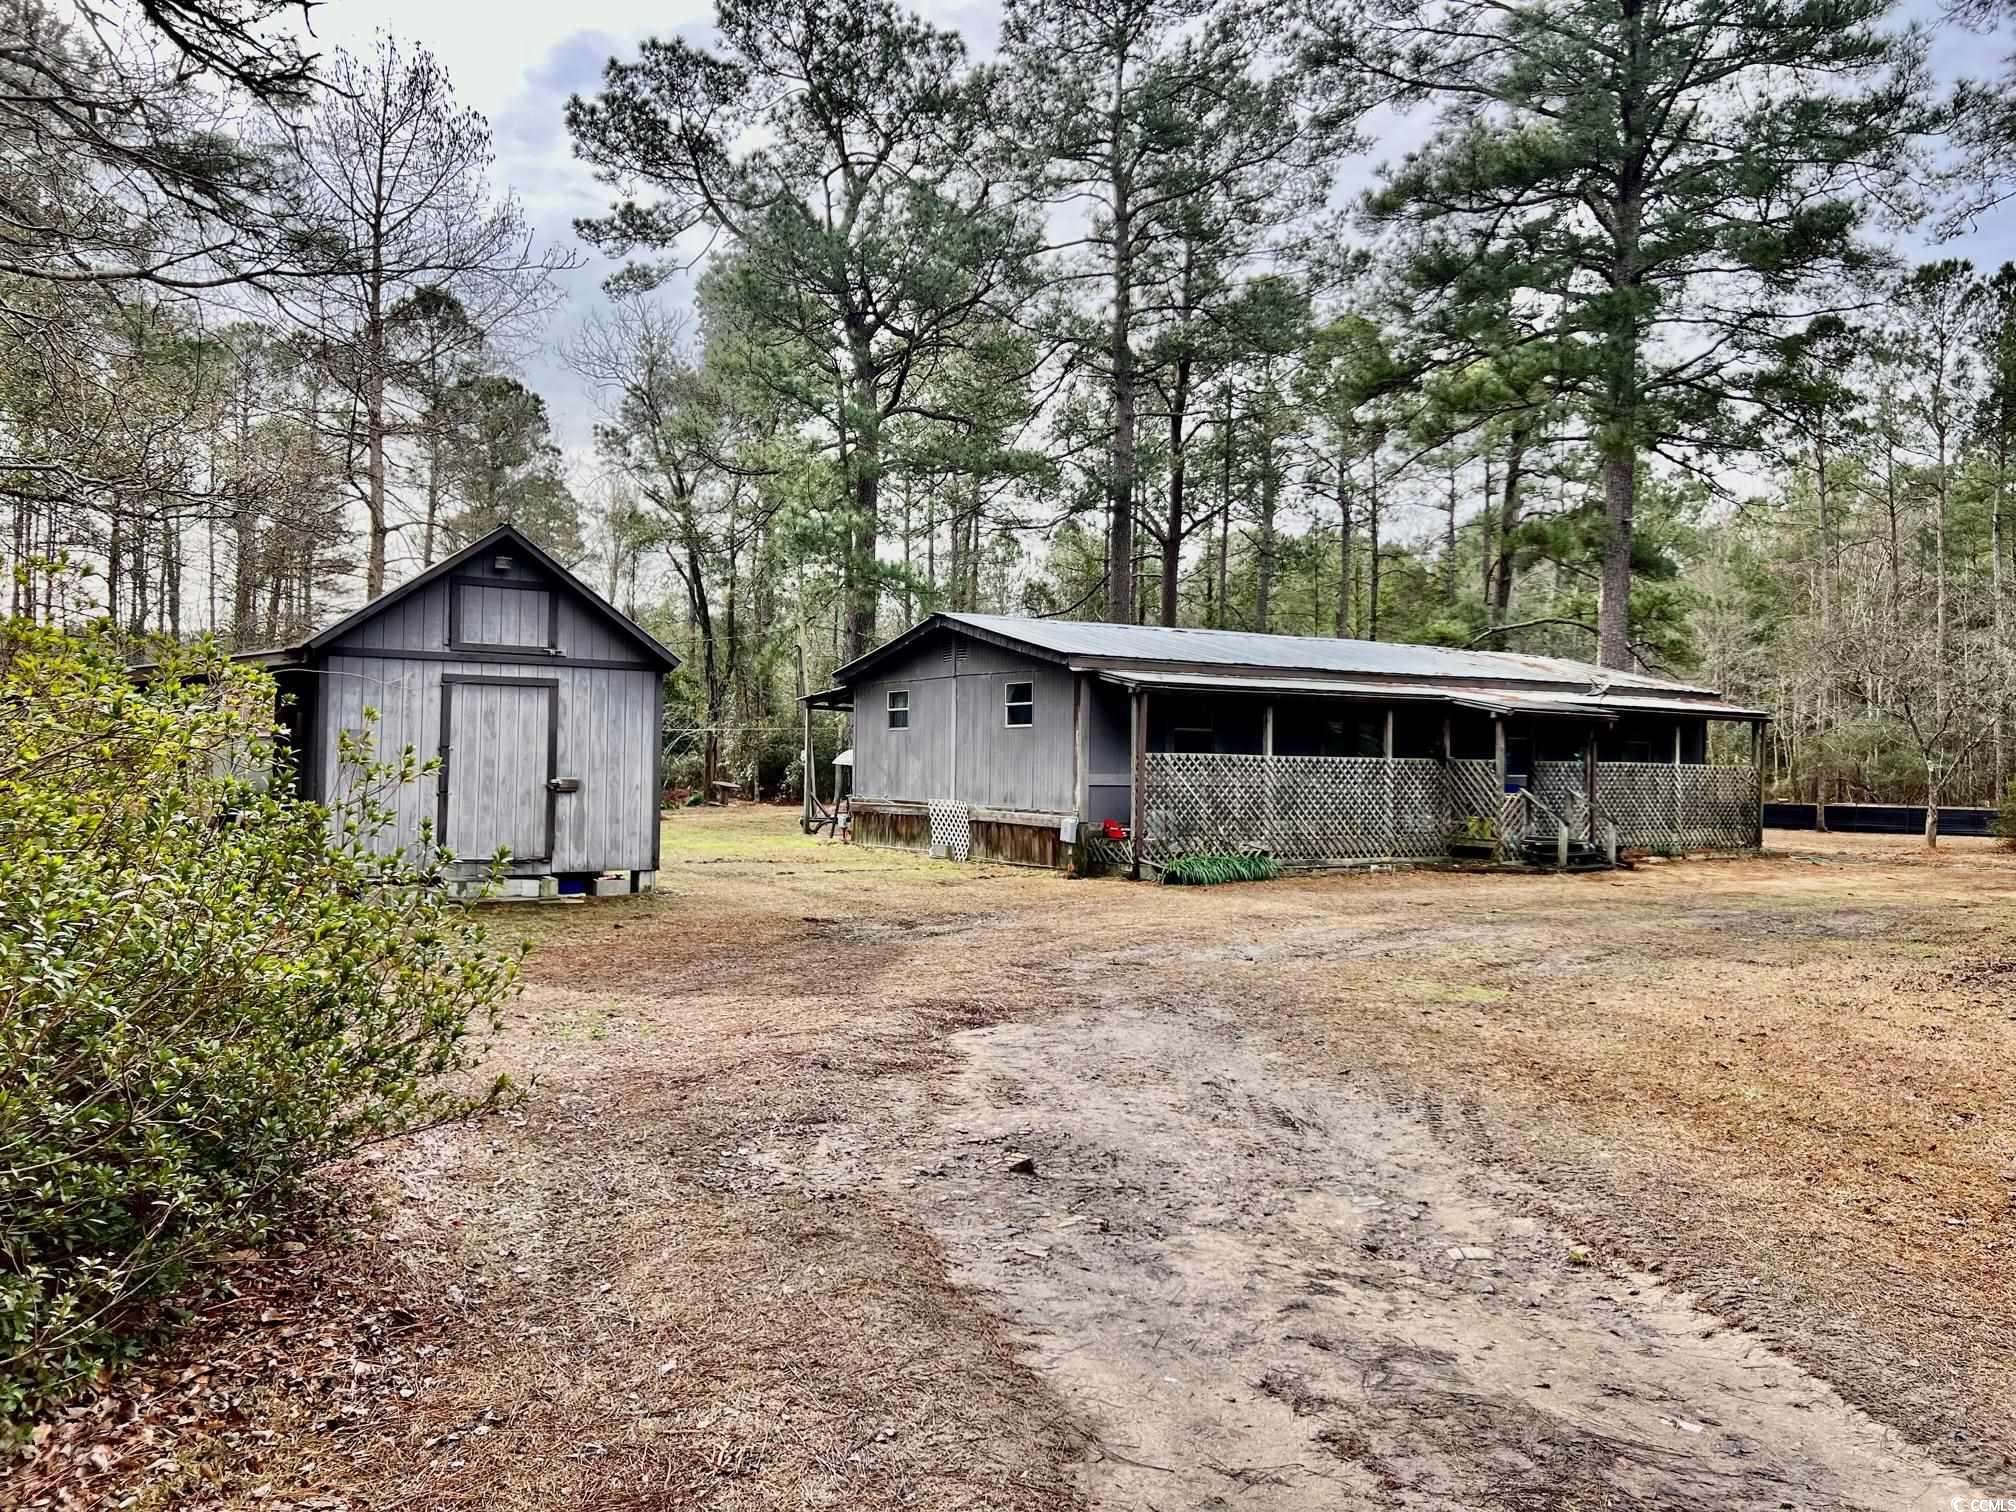 beautiful surroundings await. this is a chance to own acreage in the conway area on your own personal 4.45 acre tract. the home on site has had some updating and would make a great primary, secondary, or rental. neighborhood is quiet and peaceful. please contact agent for showing!